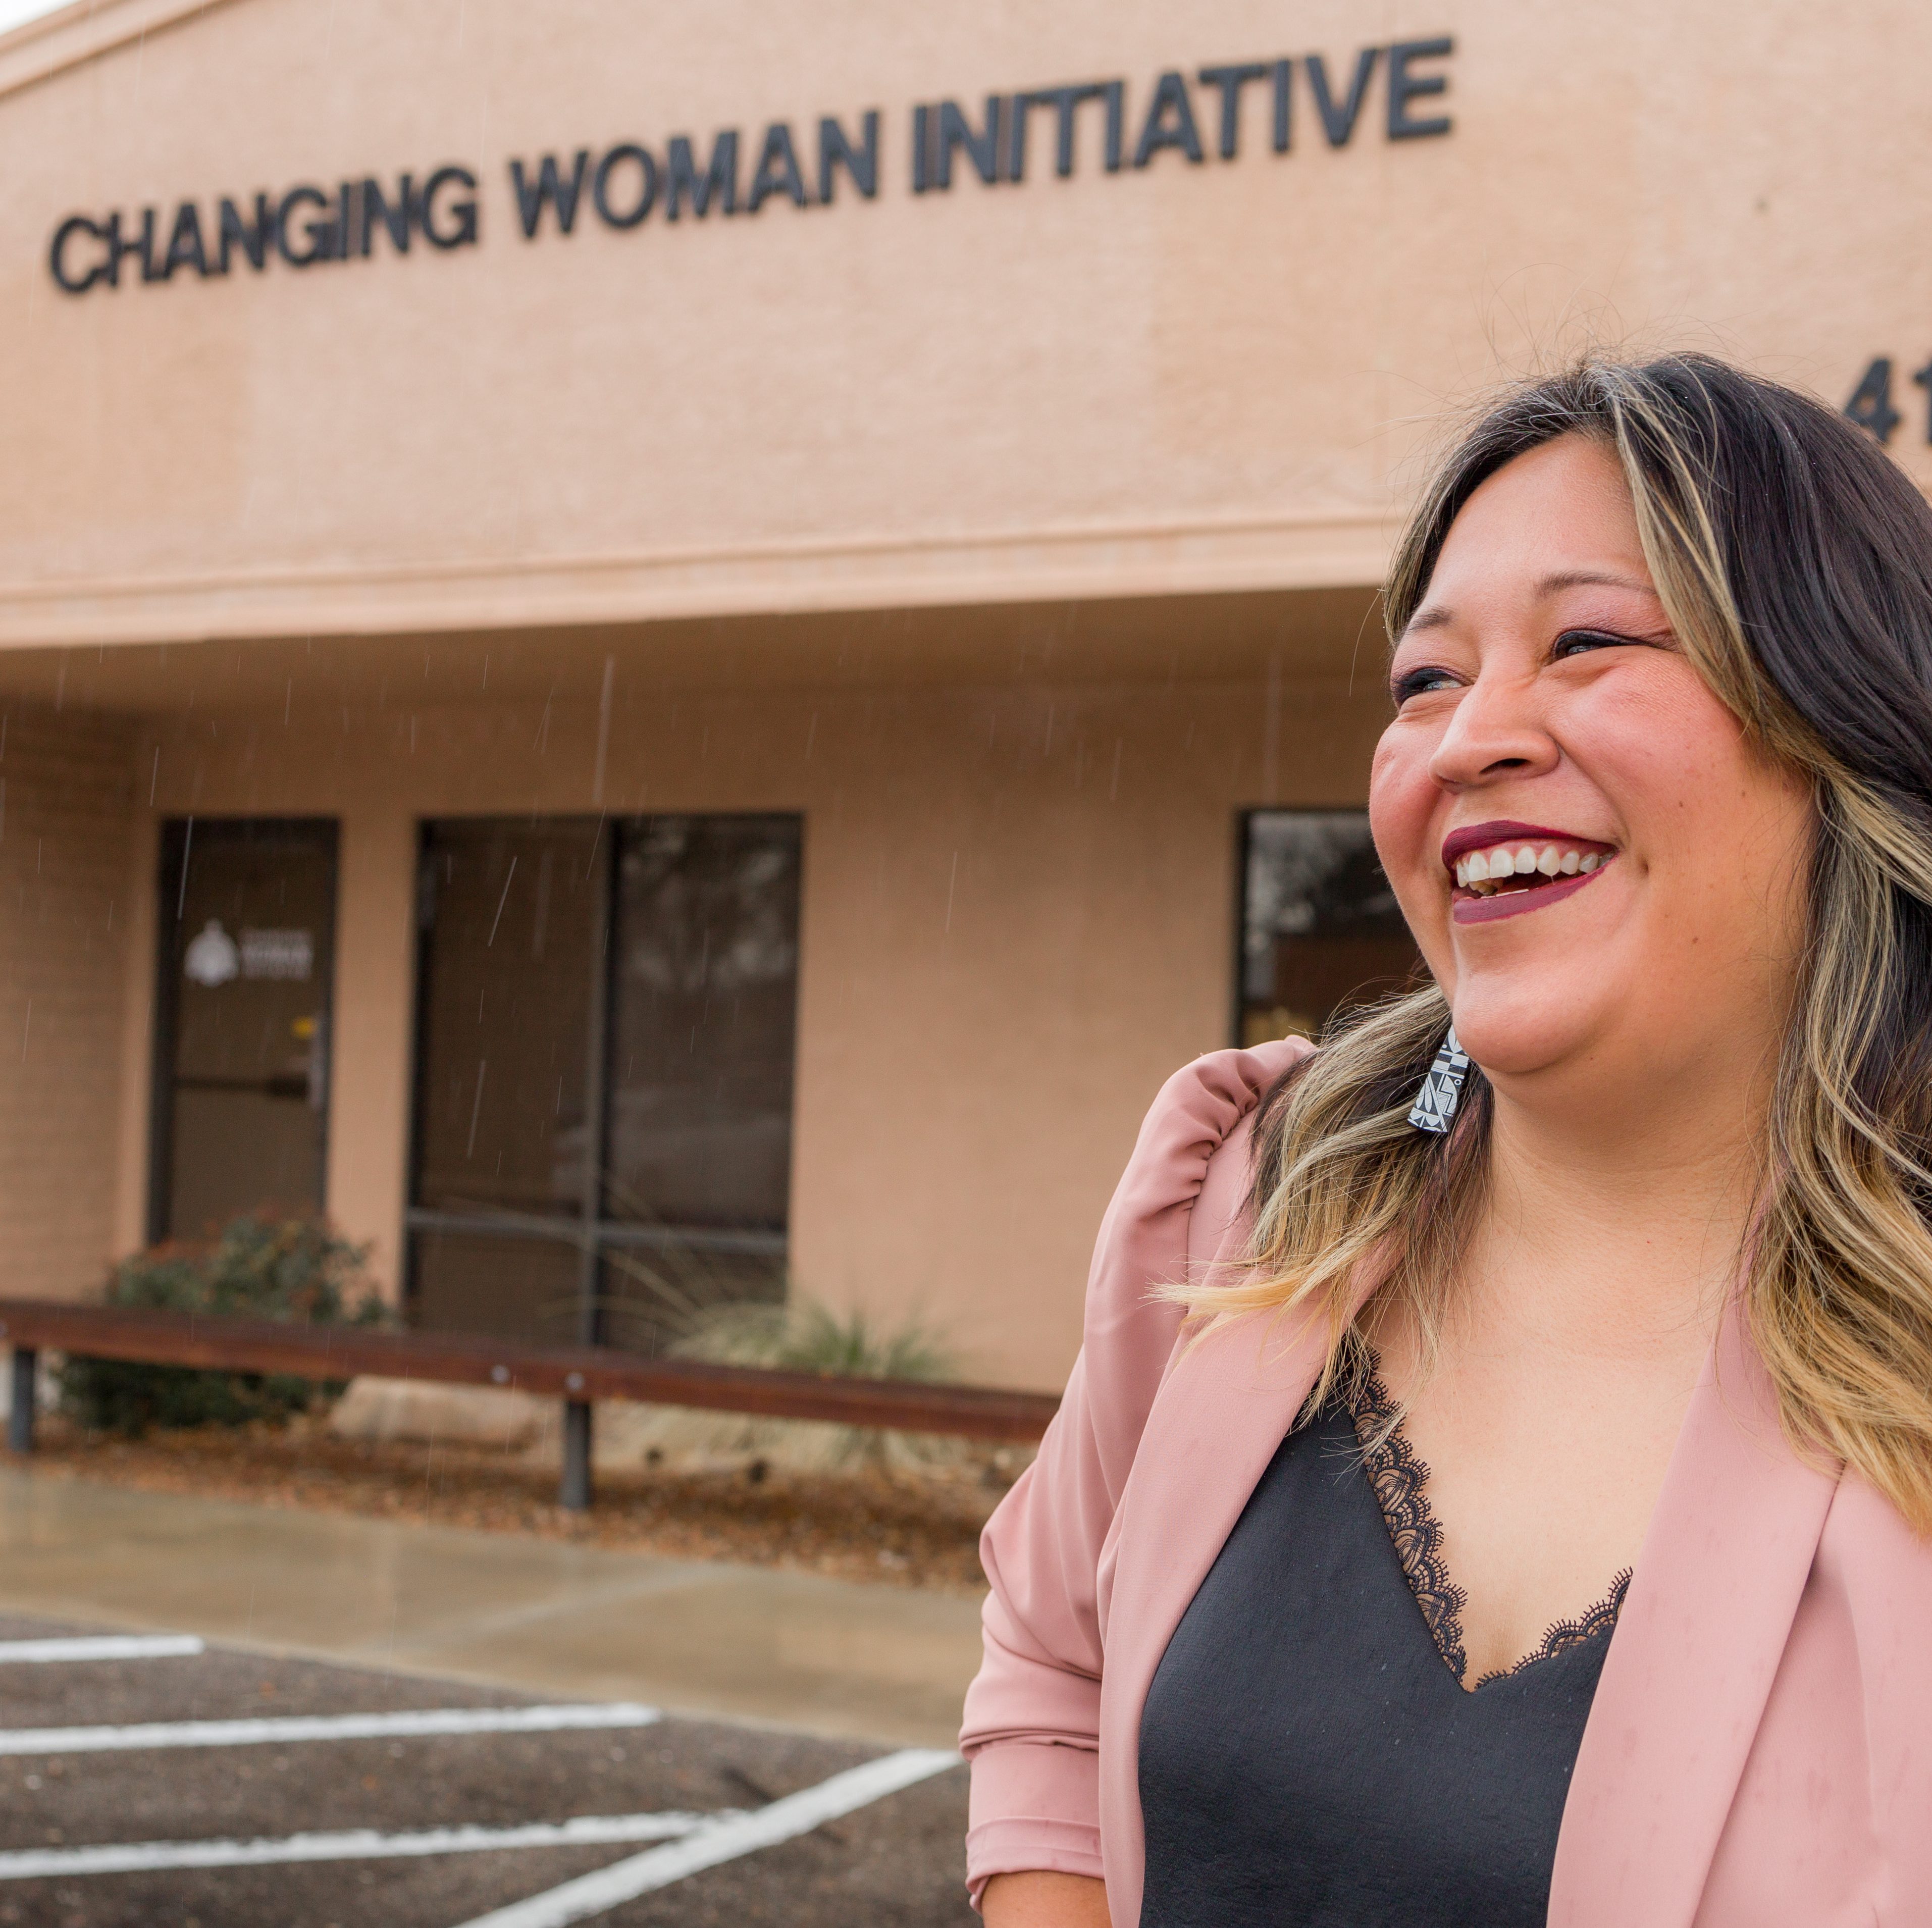 Nicolle L. Gonzales BSN, RN, MSN, CNM, Founder and Midwifery Director of the Changing Woman Initiative